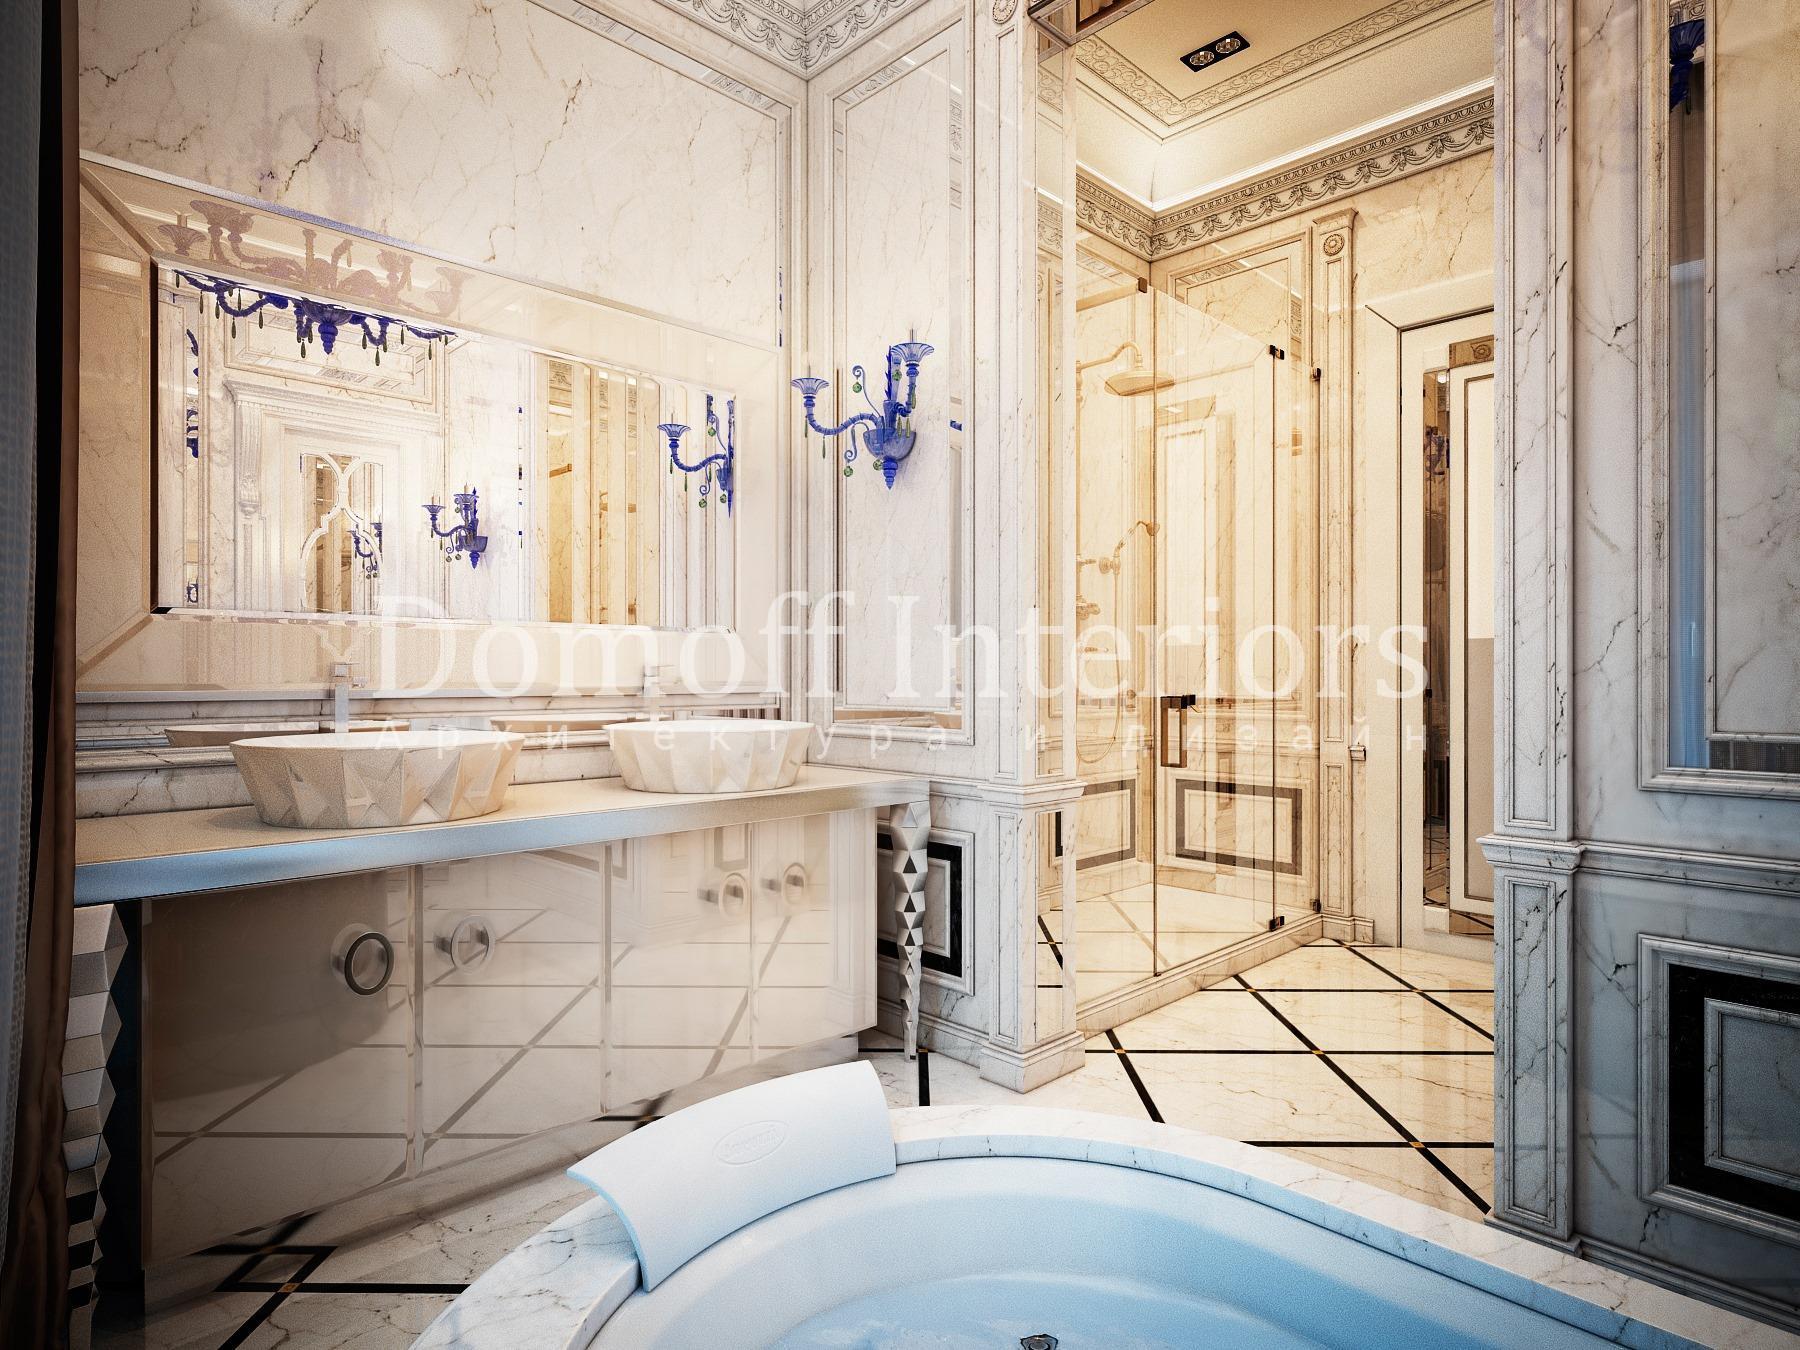 Master bathroom made in the style of Contemporary classics